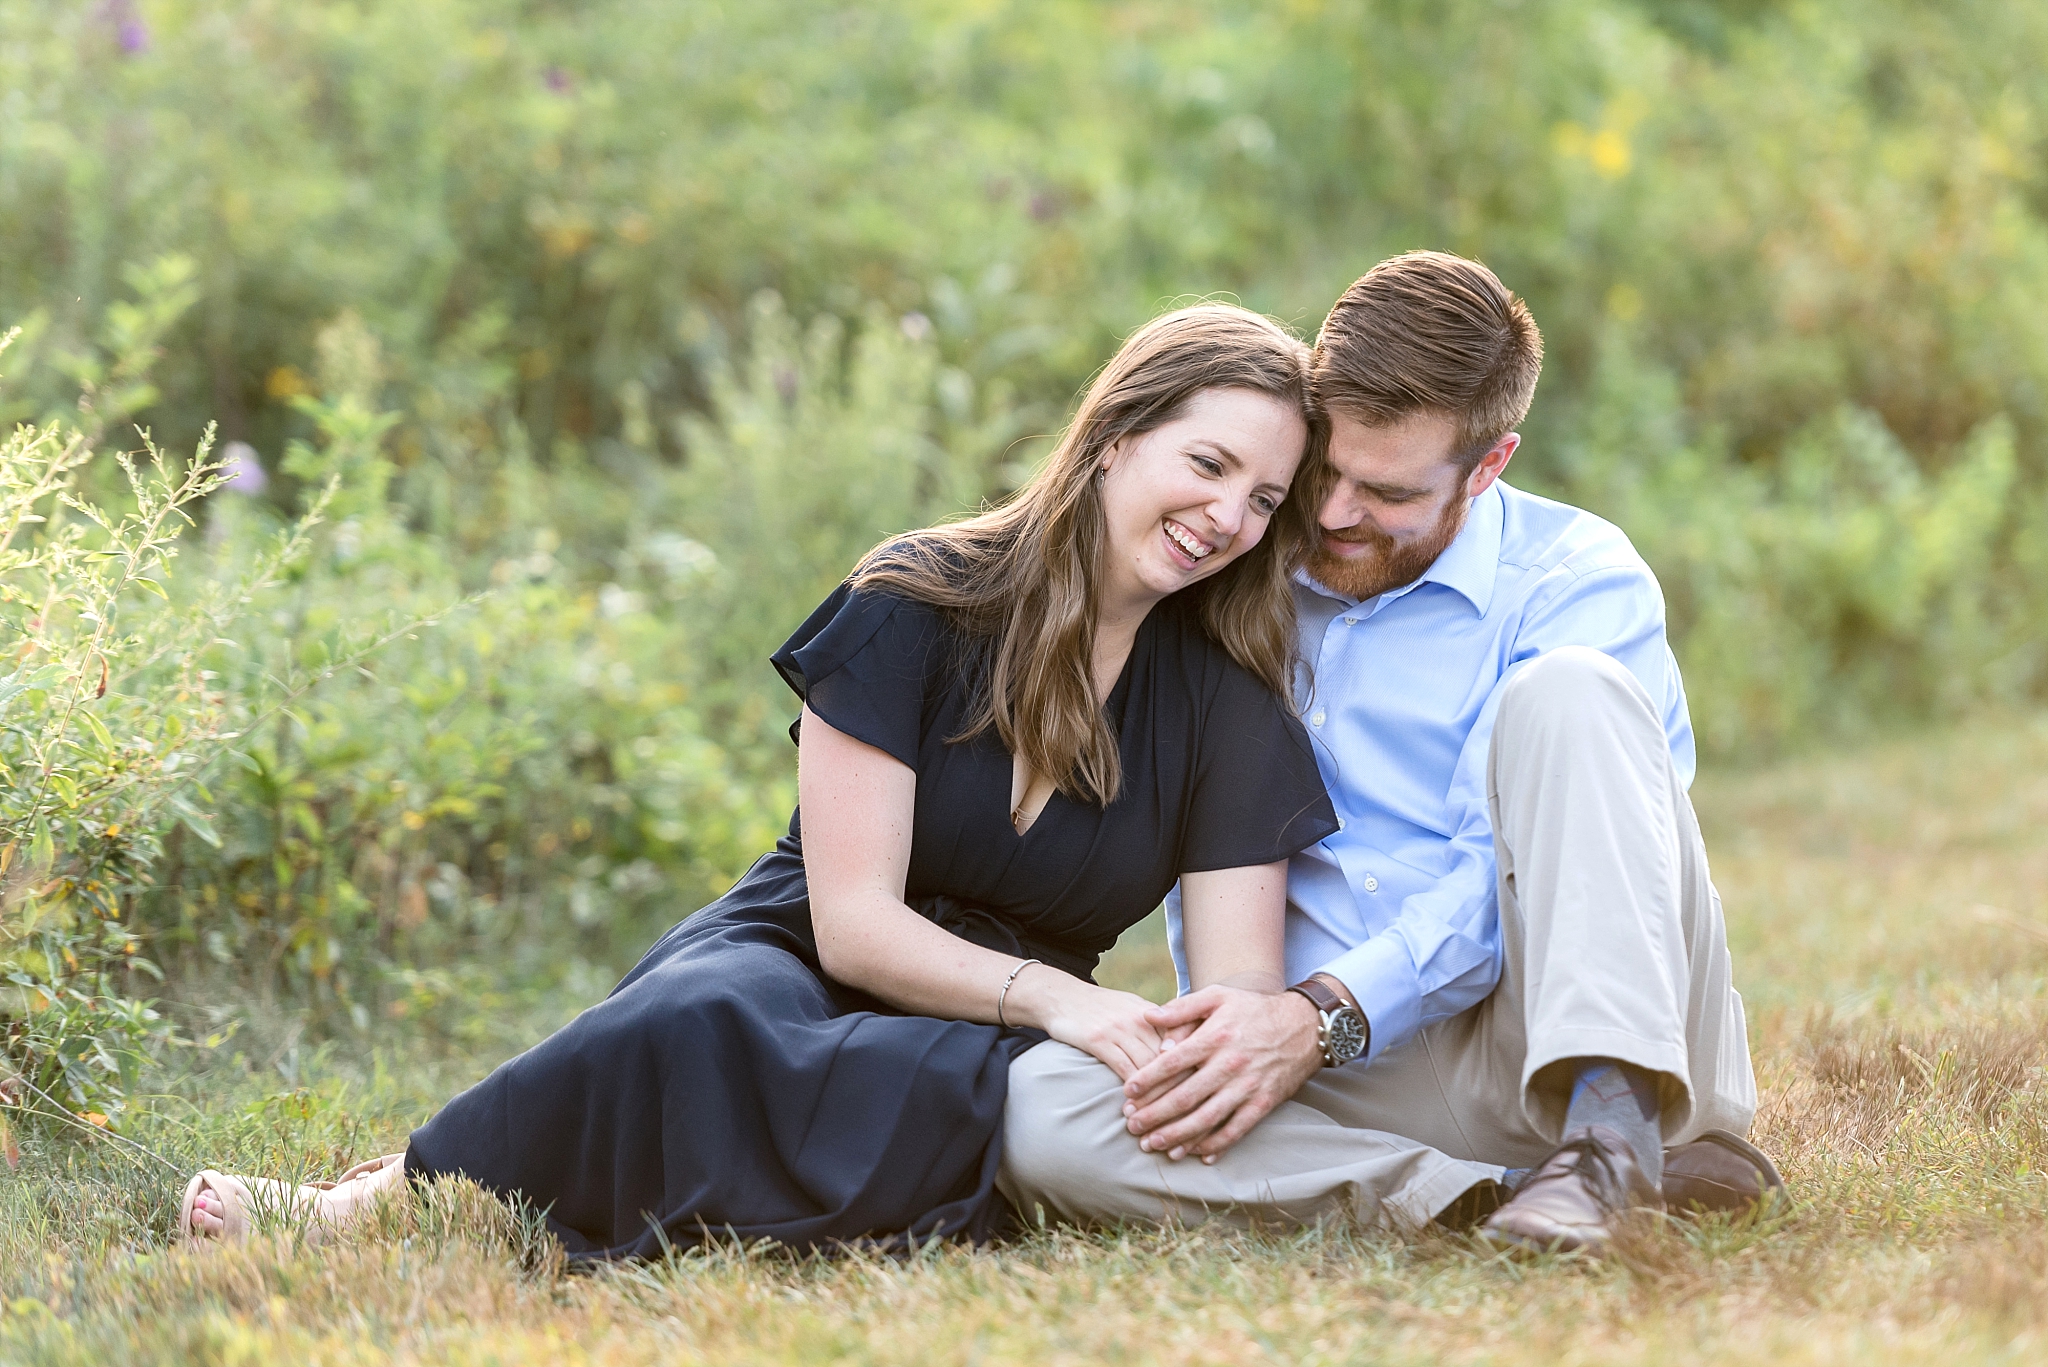 Couple sitting in grass laughing together